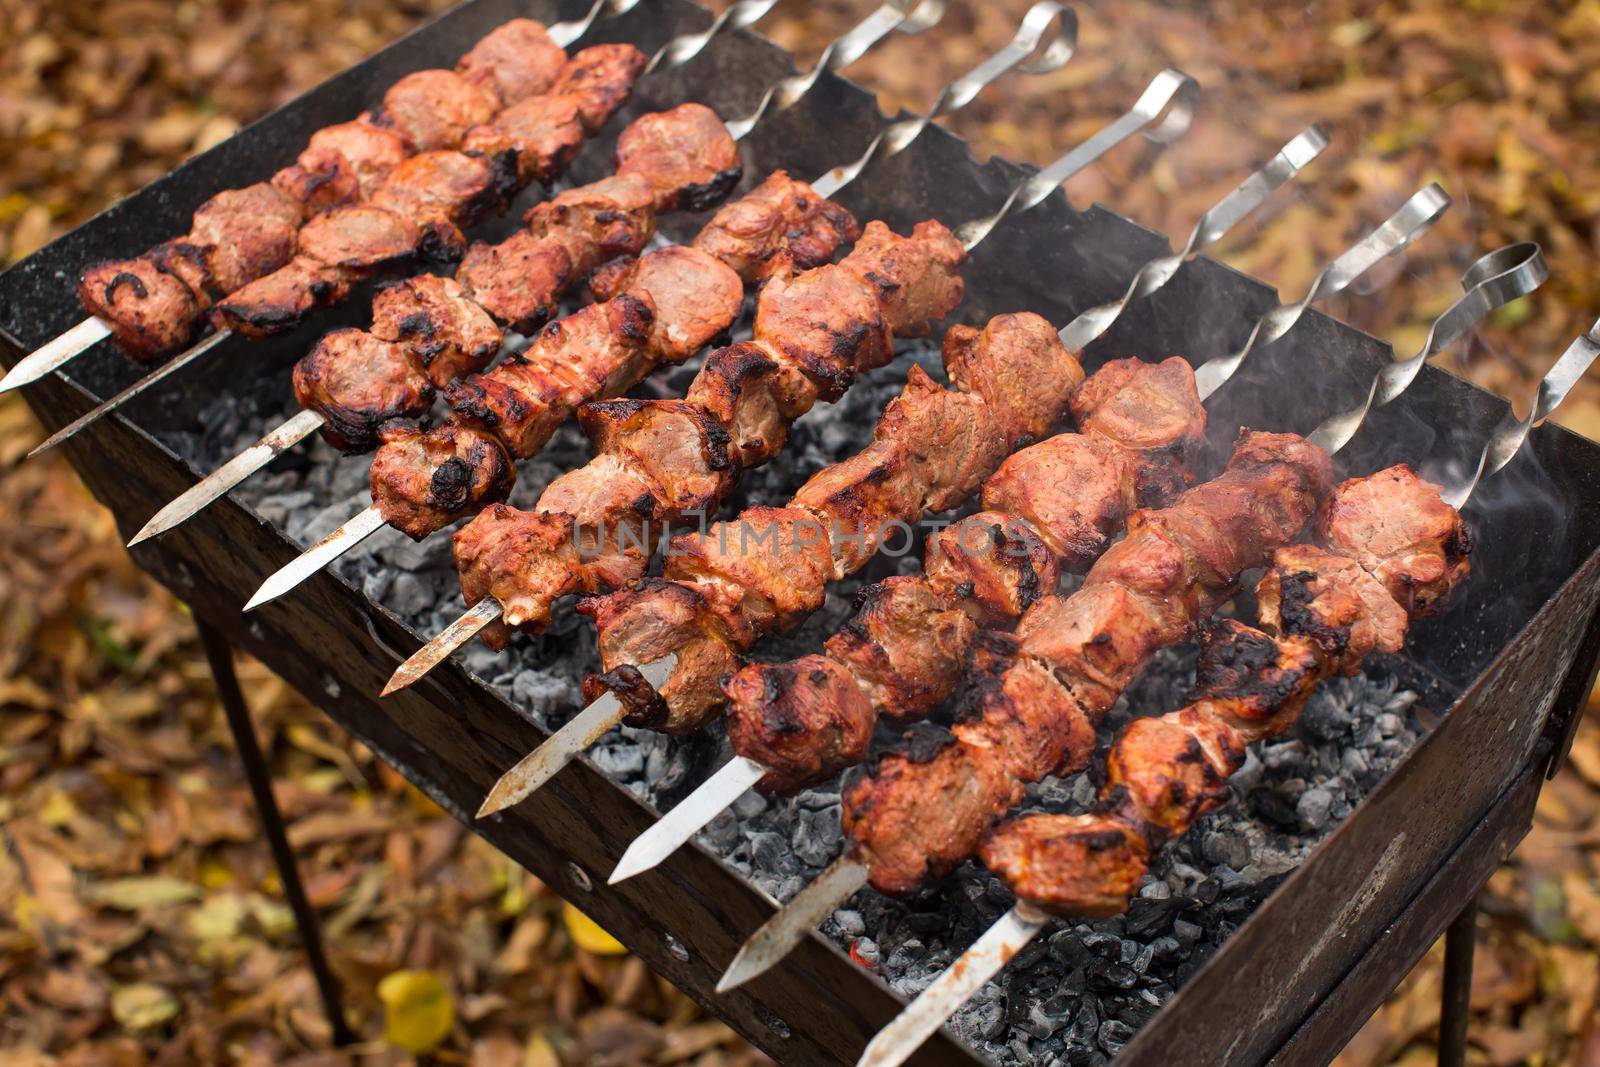 Meat roasted on fire barbecue kebabs on the grill